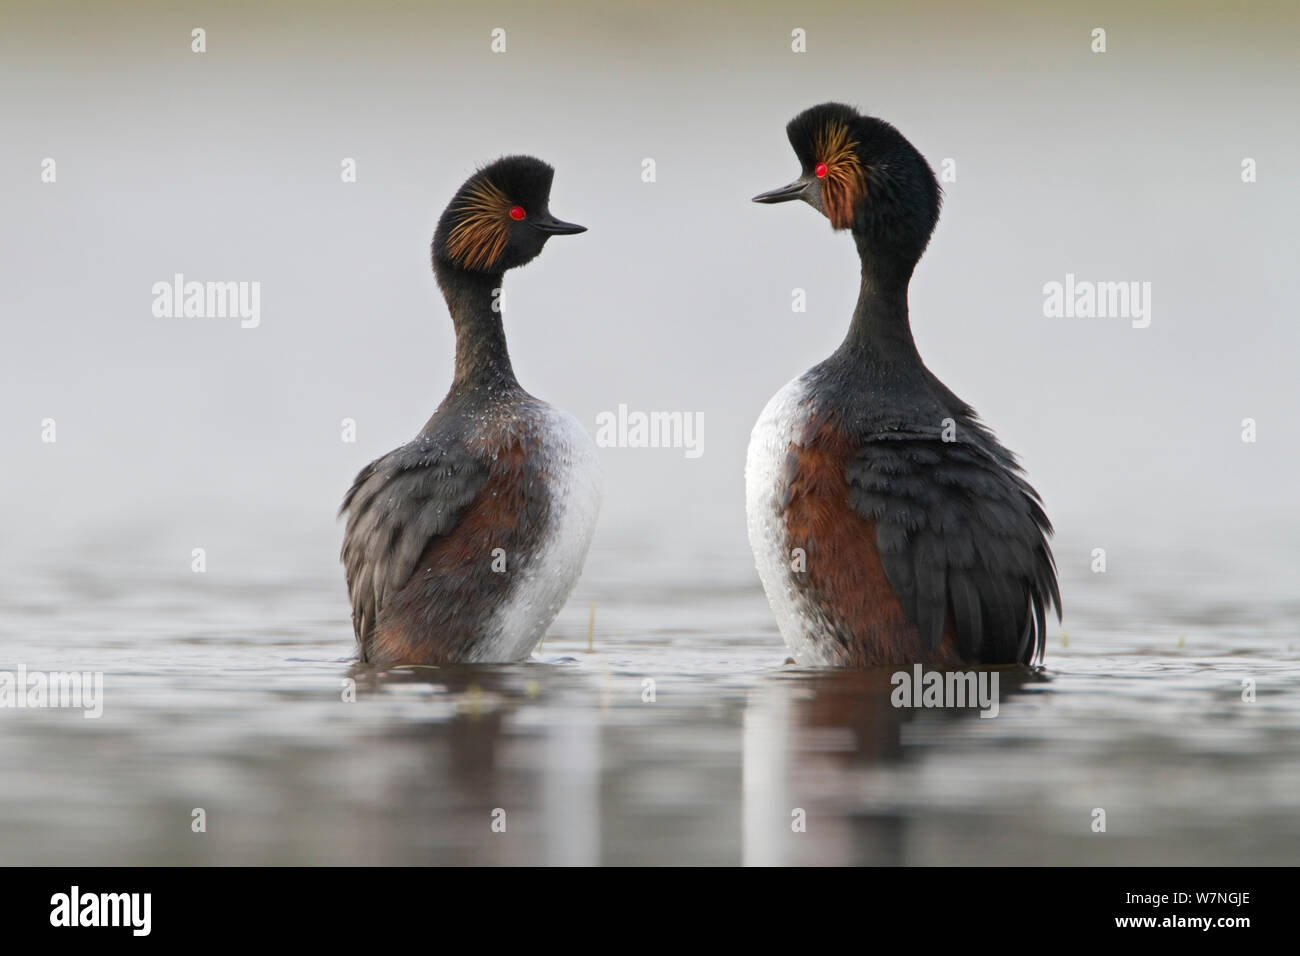 Black necked grebes (Podiceps nigricollis) pair in courtship dance during the mating season, La Dombes lake area, France, April Stock Photo